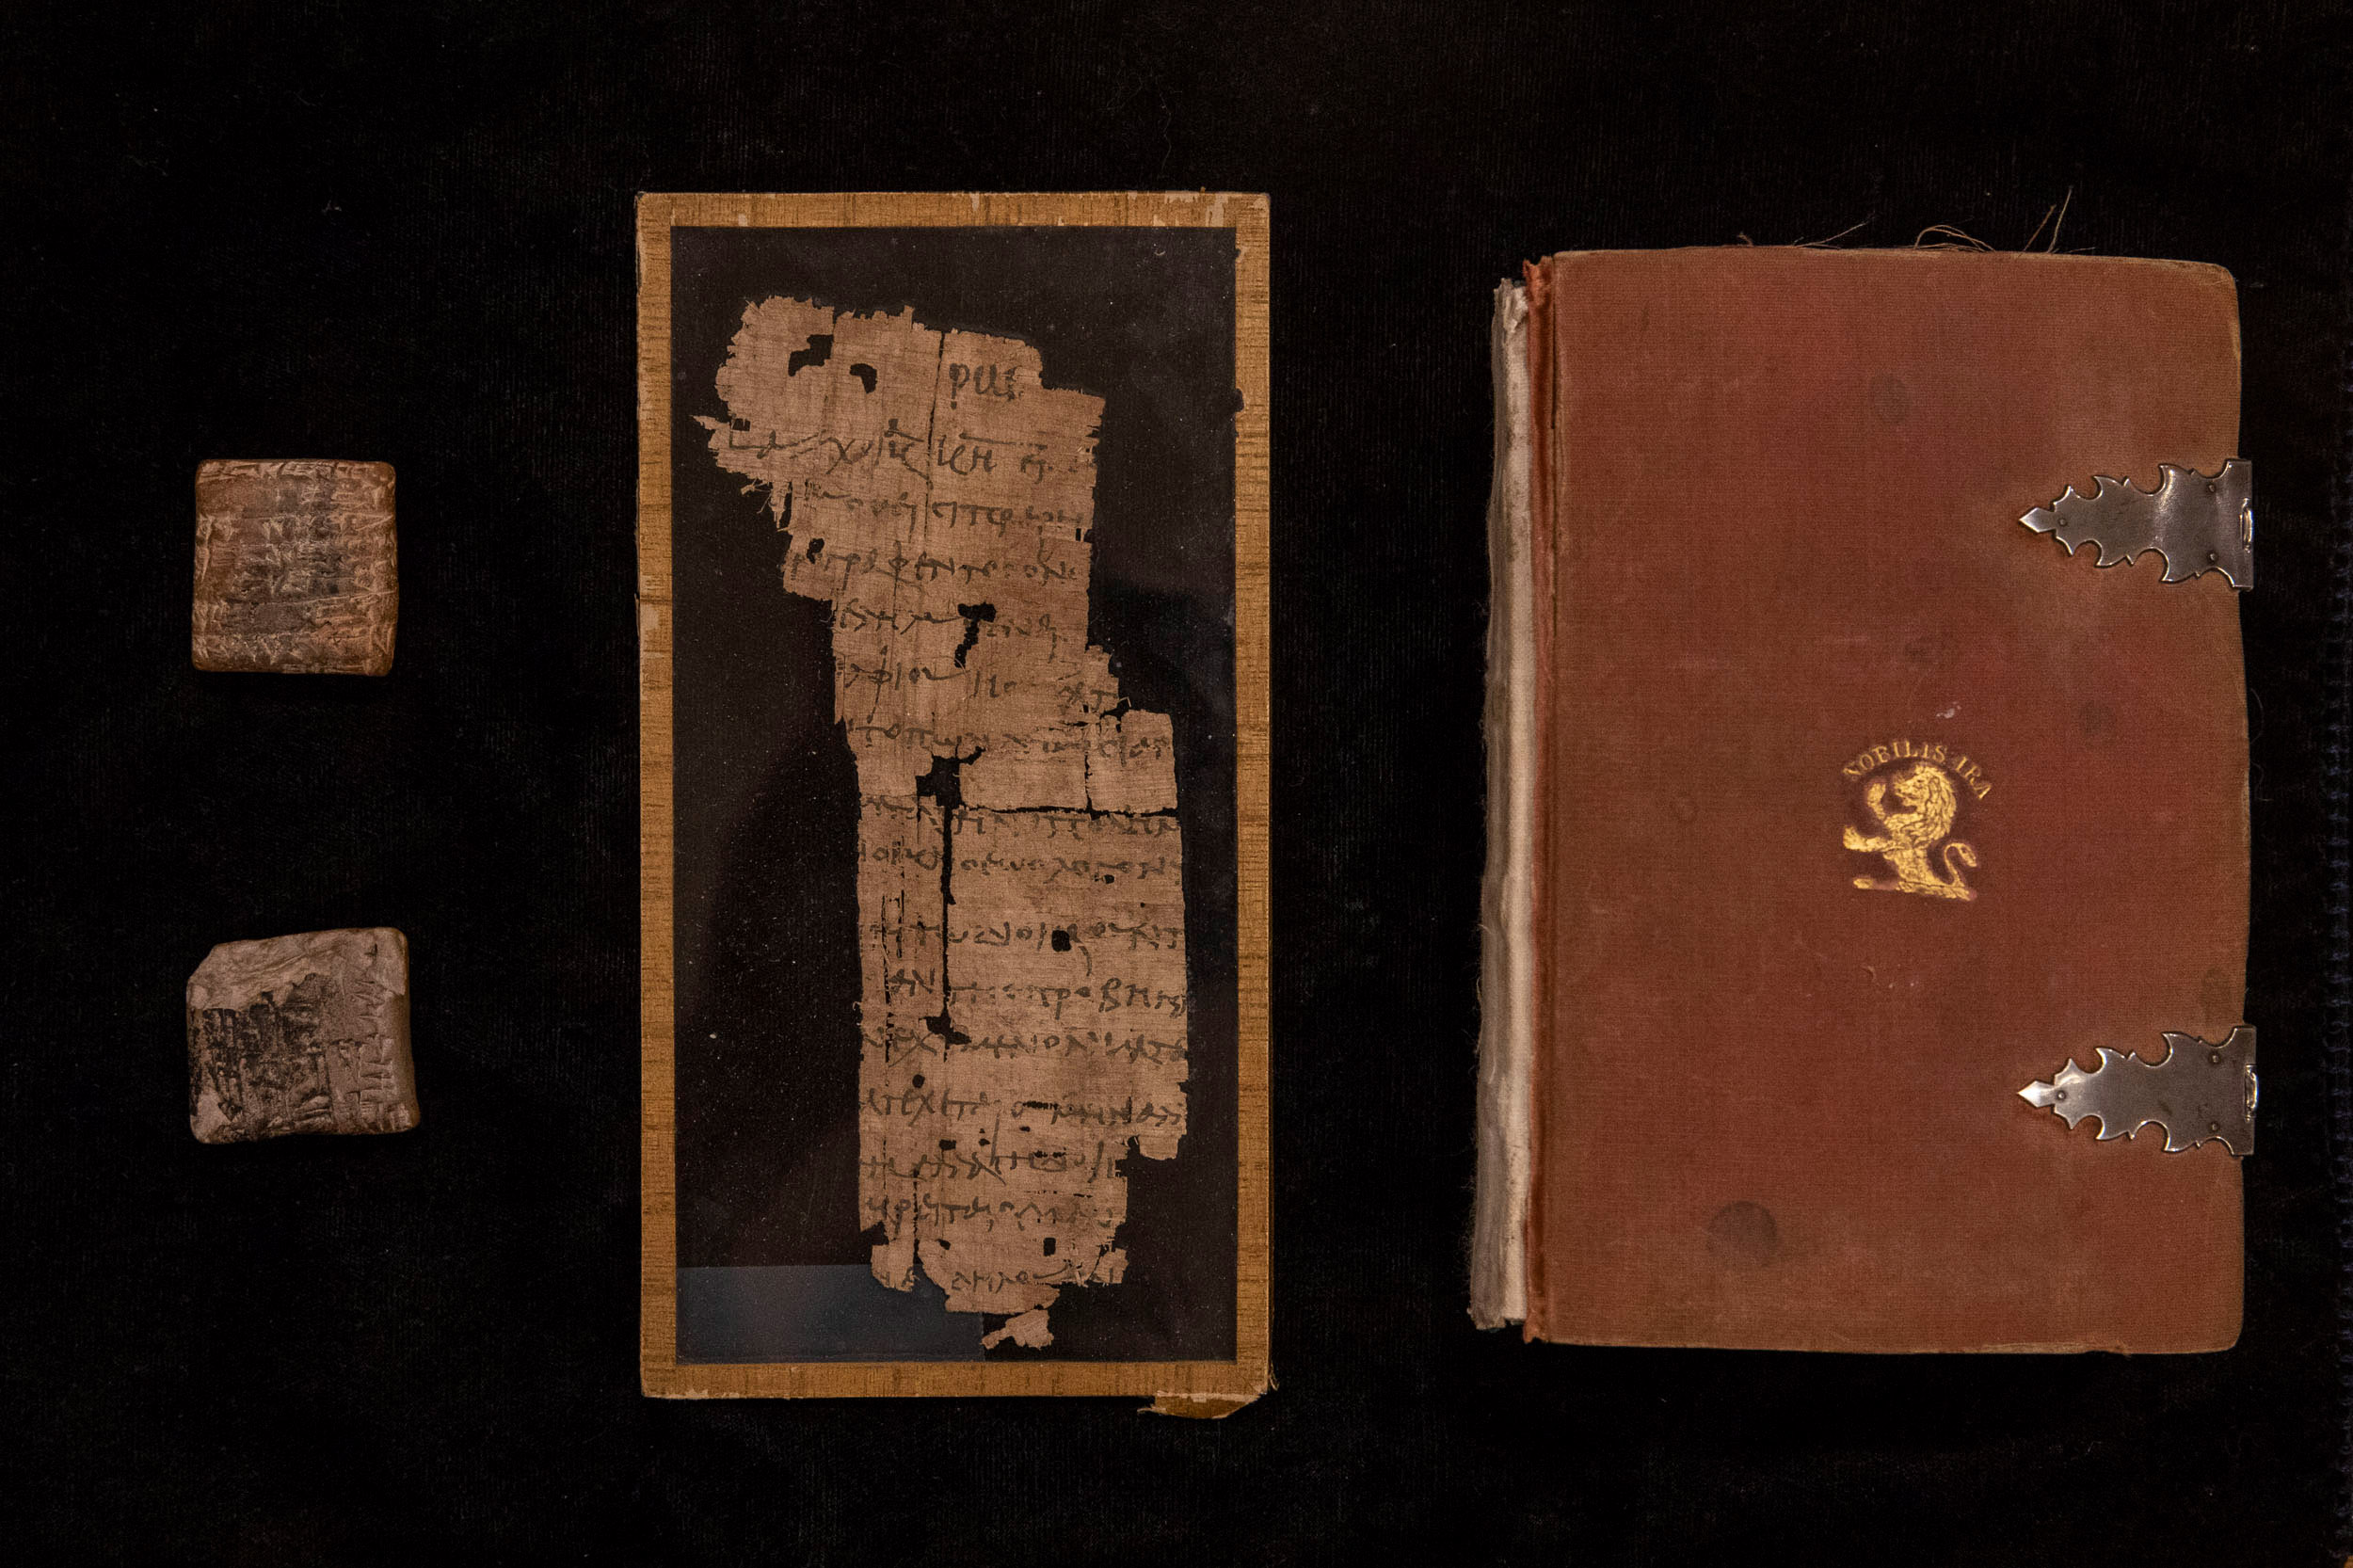 From left to right, a Babylonian clay tablet dating back to 2450 B.C., Middle: a piece of Egyptian papyrus from 100 A.D., and Right:  the revolutionary Paris pocket bible, circa 1270 A.D., handwritten on animal skin.